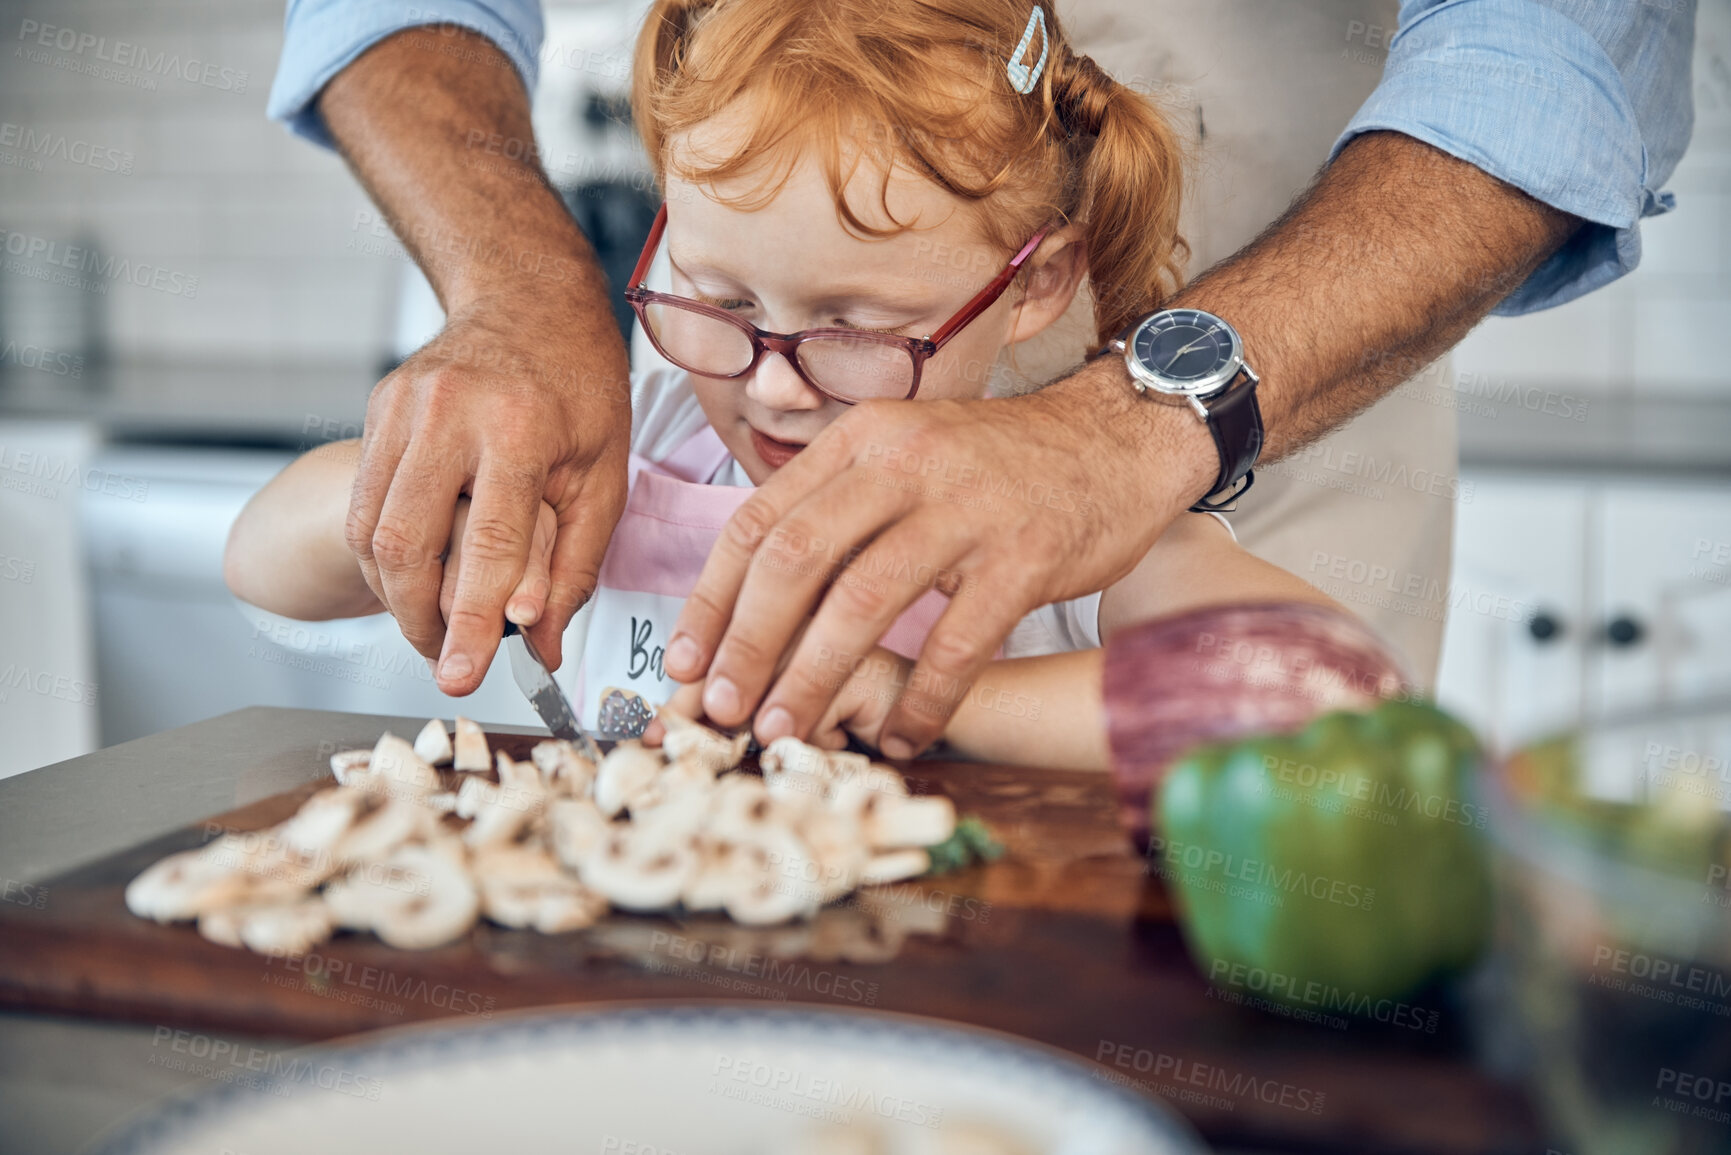 Buy stock photo Kid, dad and cooking, cutting board and food in kitchen, family home or house for childhood fun, learning and development. Parent helping little girl chop mushroom vegetables for lunch or dinner meal